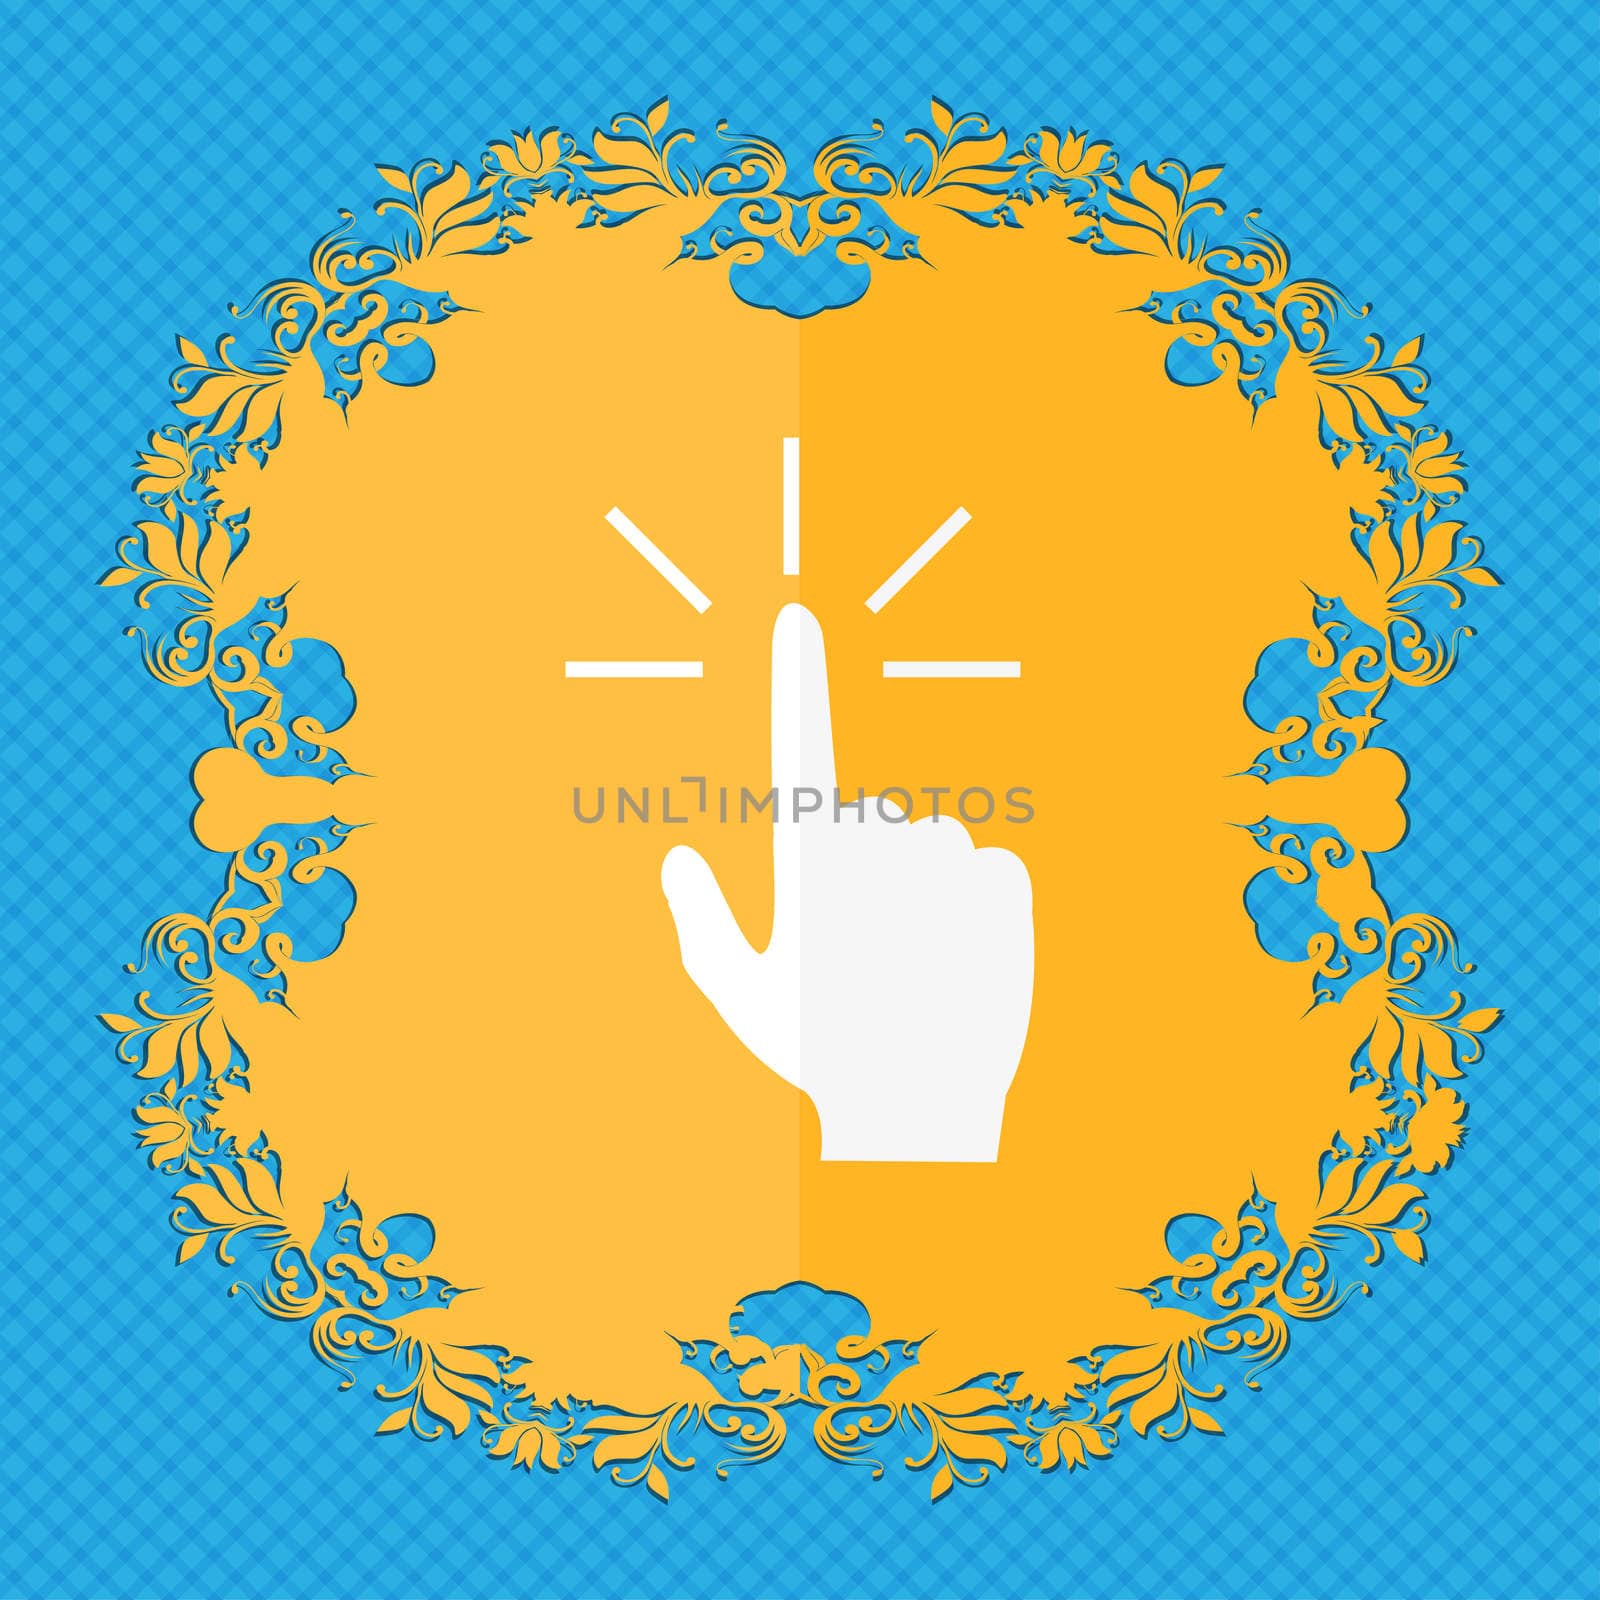 Click here hand icon sign. Floral flat design on a blue abstract background with place for your text. illustration